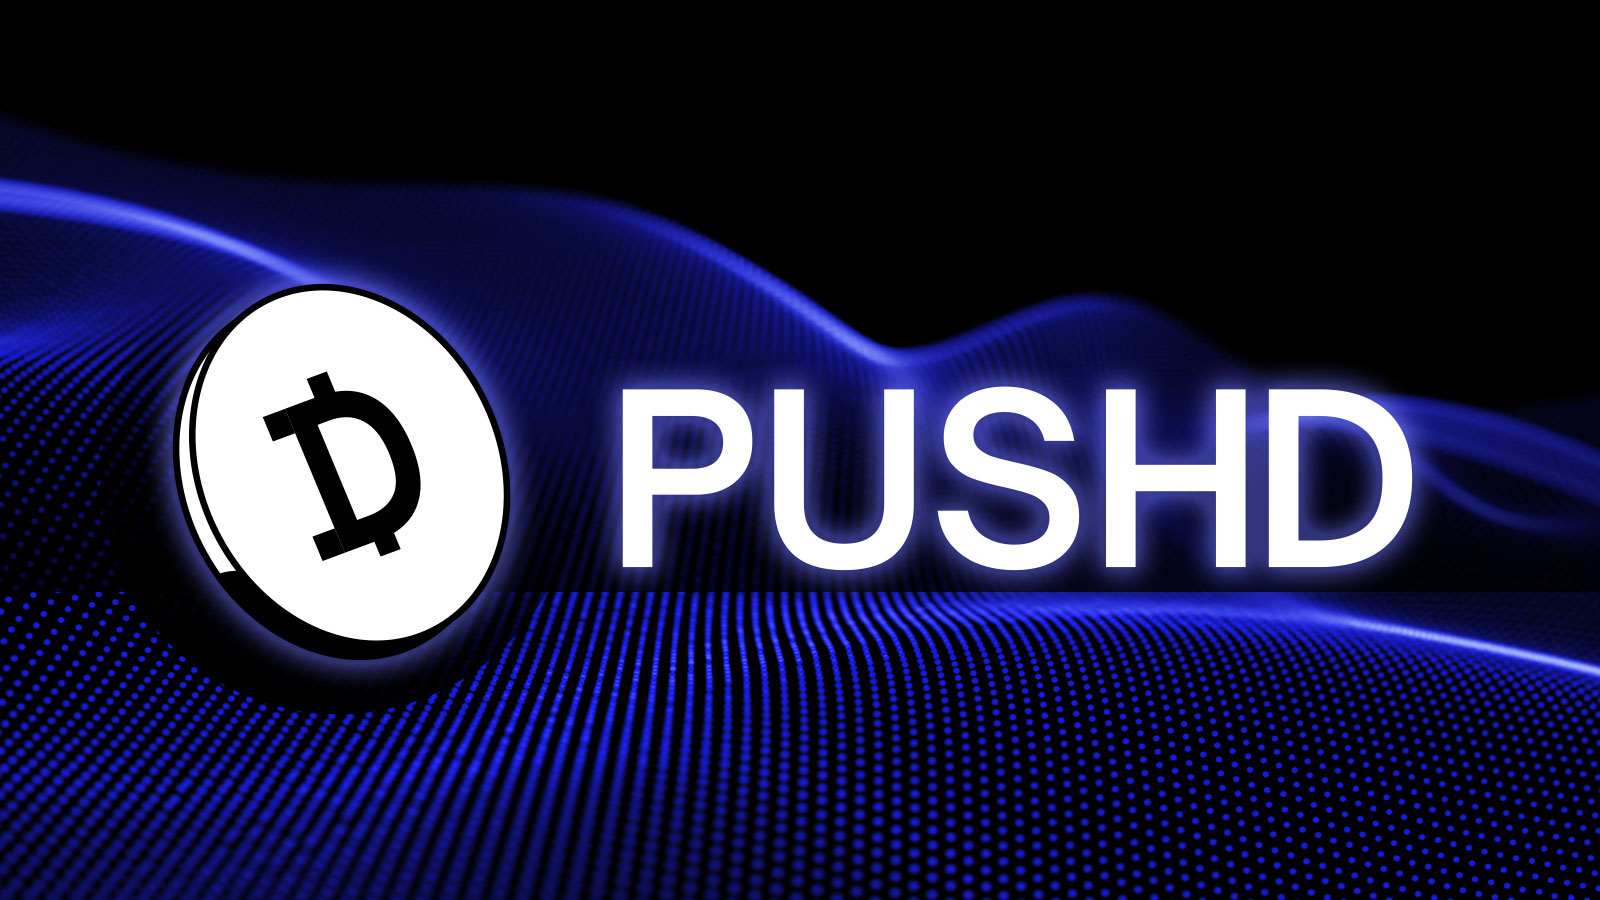 Pushd (PUSHD) Token Pre-Sale Welcomed by Analysts and Traders while Polygon (MATIC) and Honk (HONK) Communities Waiting for Announcements